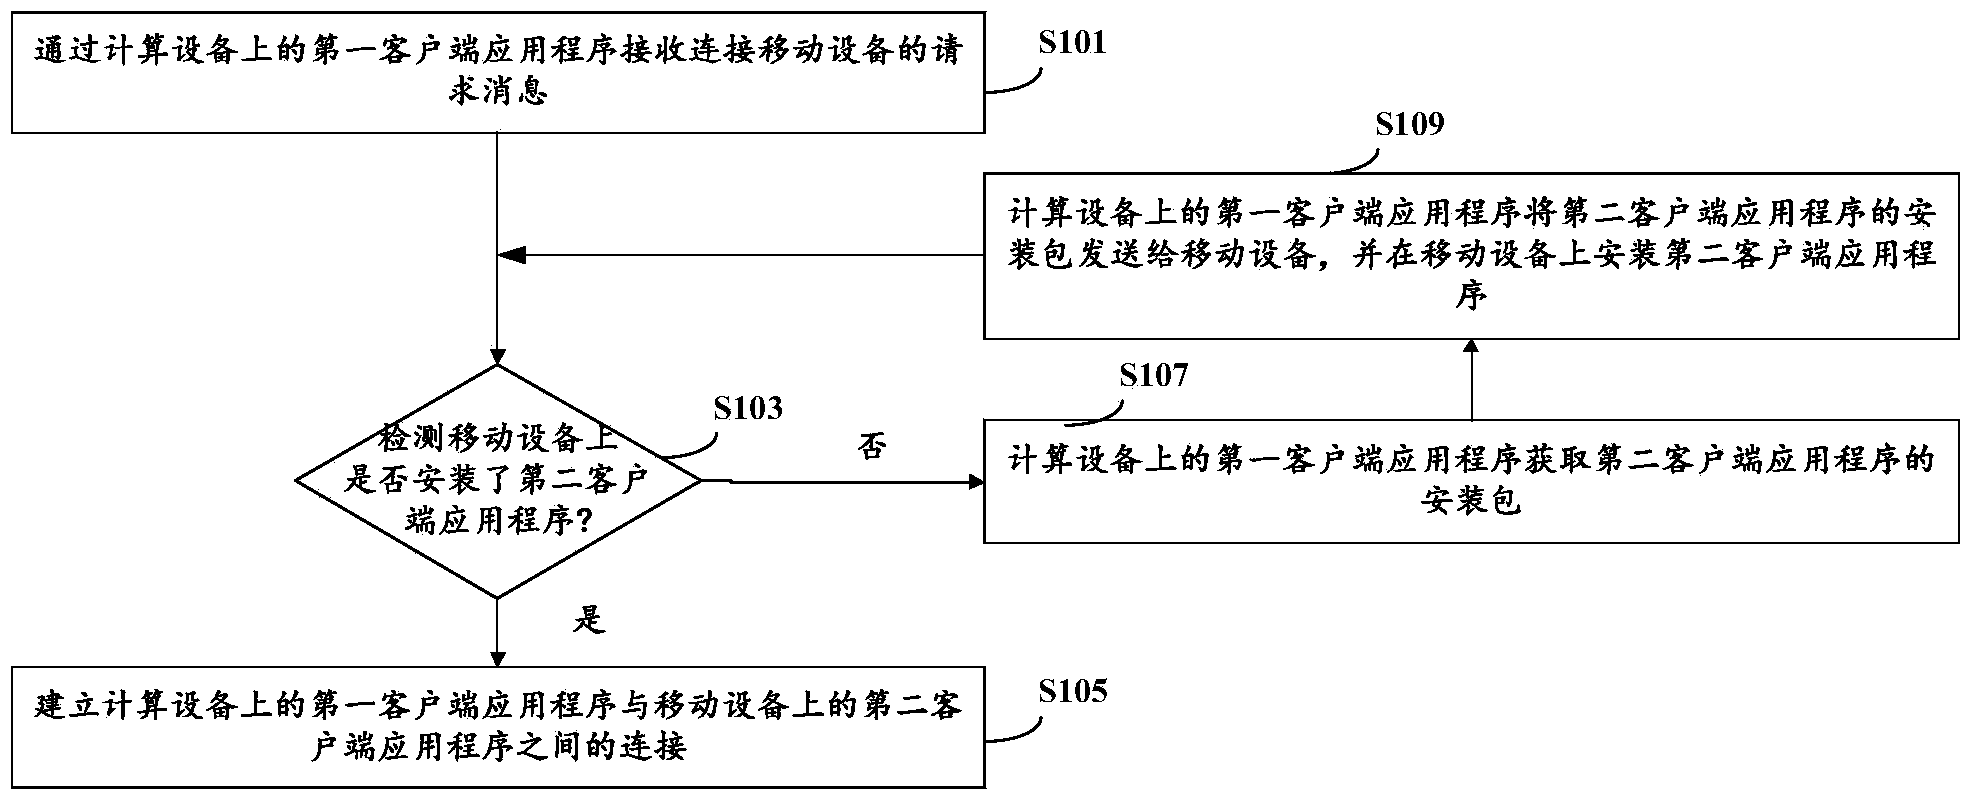 Method and device for establishing connection between computing device and mobile device